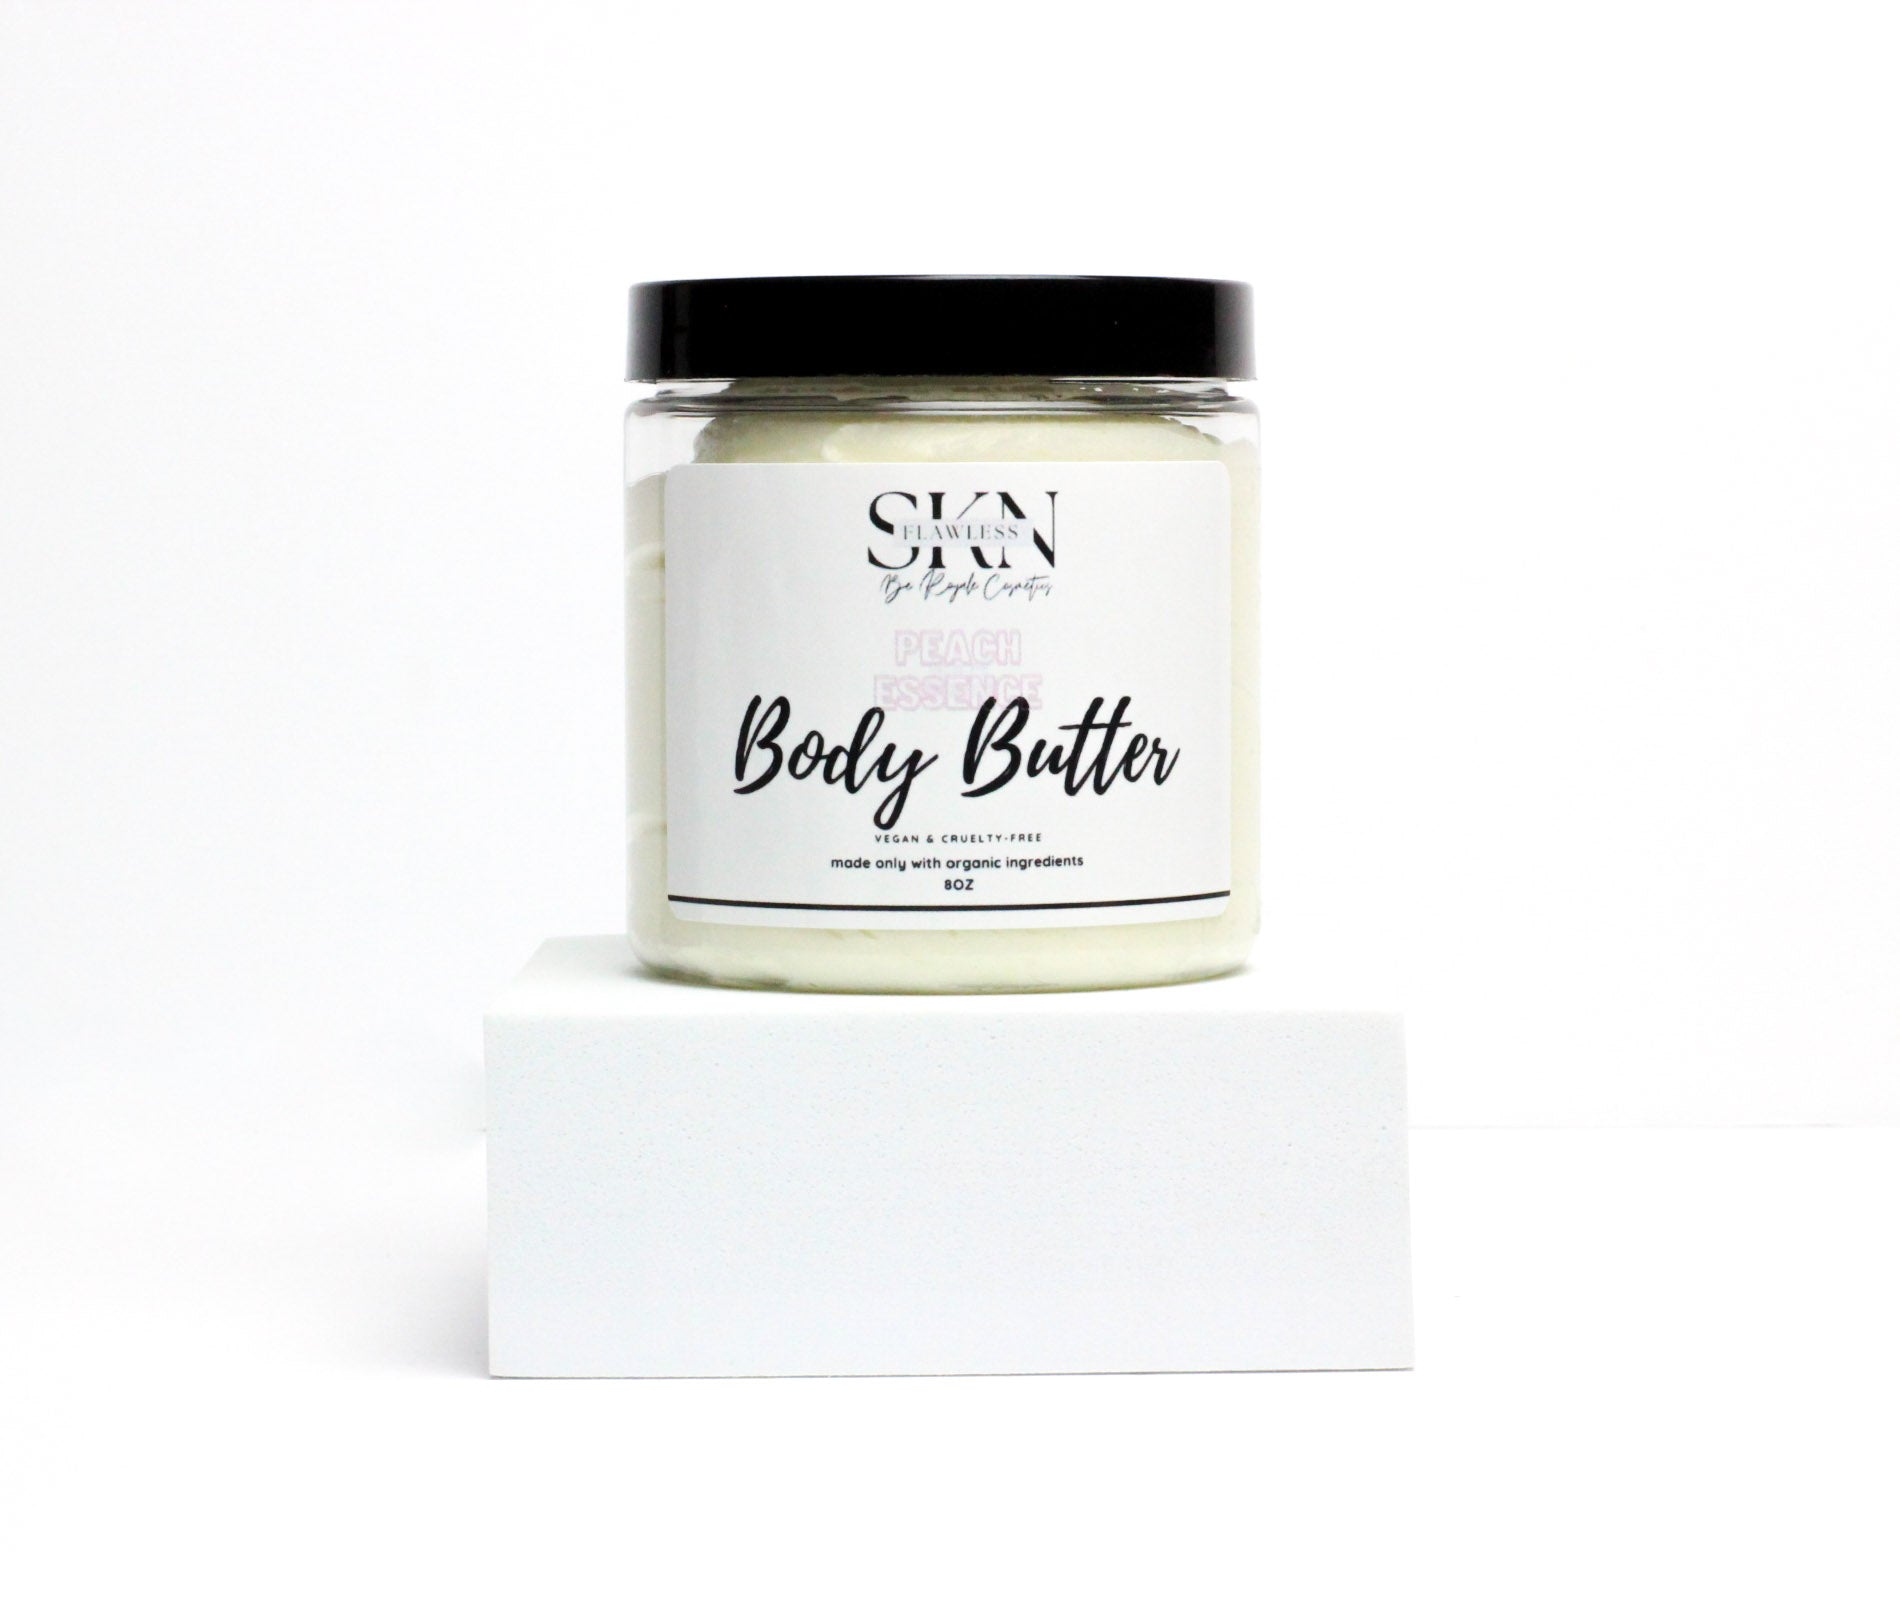 Flawless Skncare's Glow Baby Whipped Body Butter